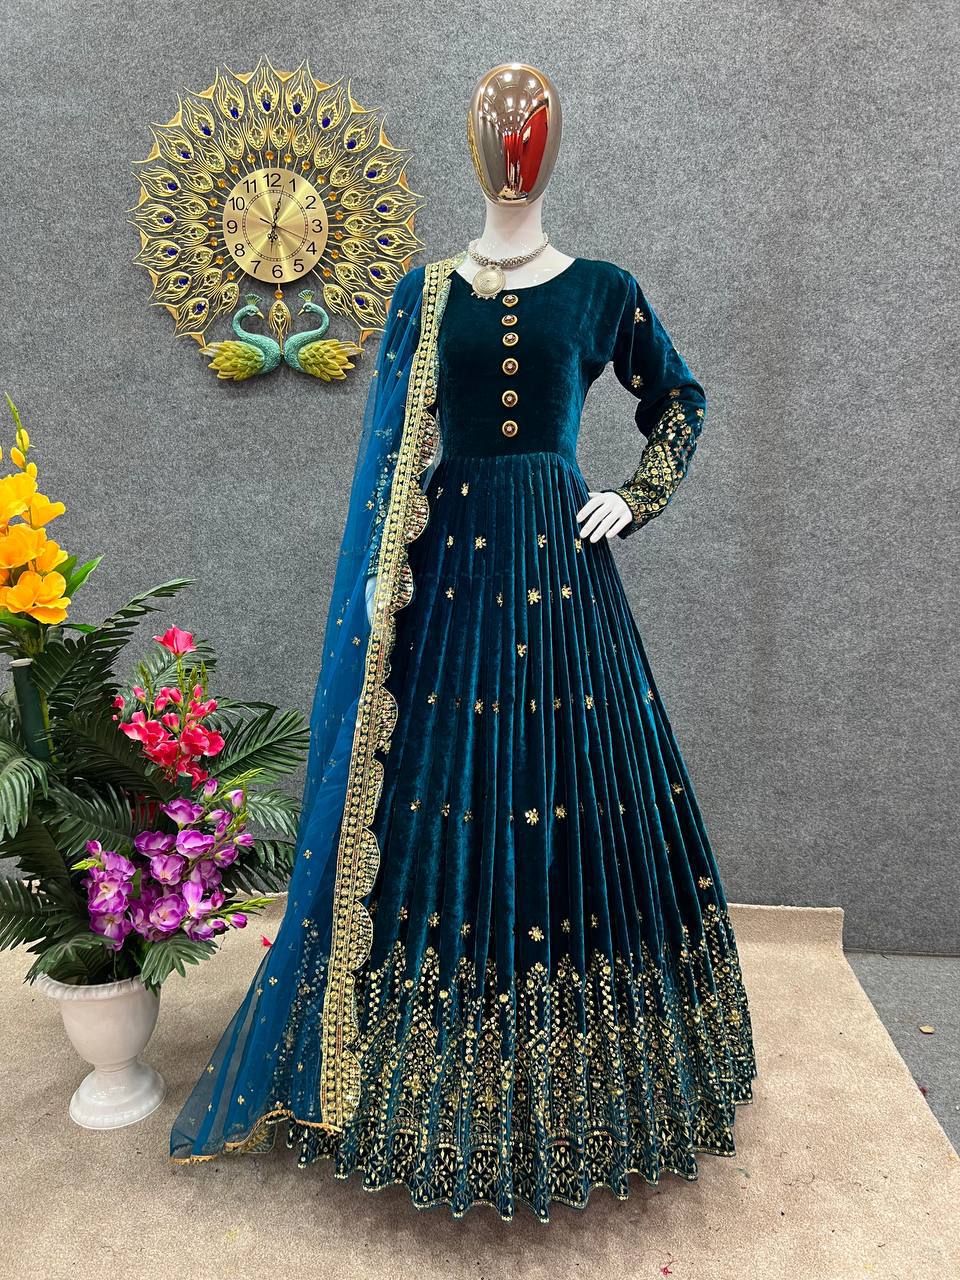 Booma Luxury Blue Heavy Beaded Embroidered Evening Dresses Scoop Long  Sleeves Overskirts Illusion Formal Party Gowns Real Photos - Evening Dresses  - AliExpress